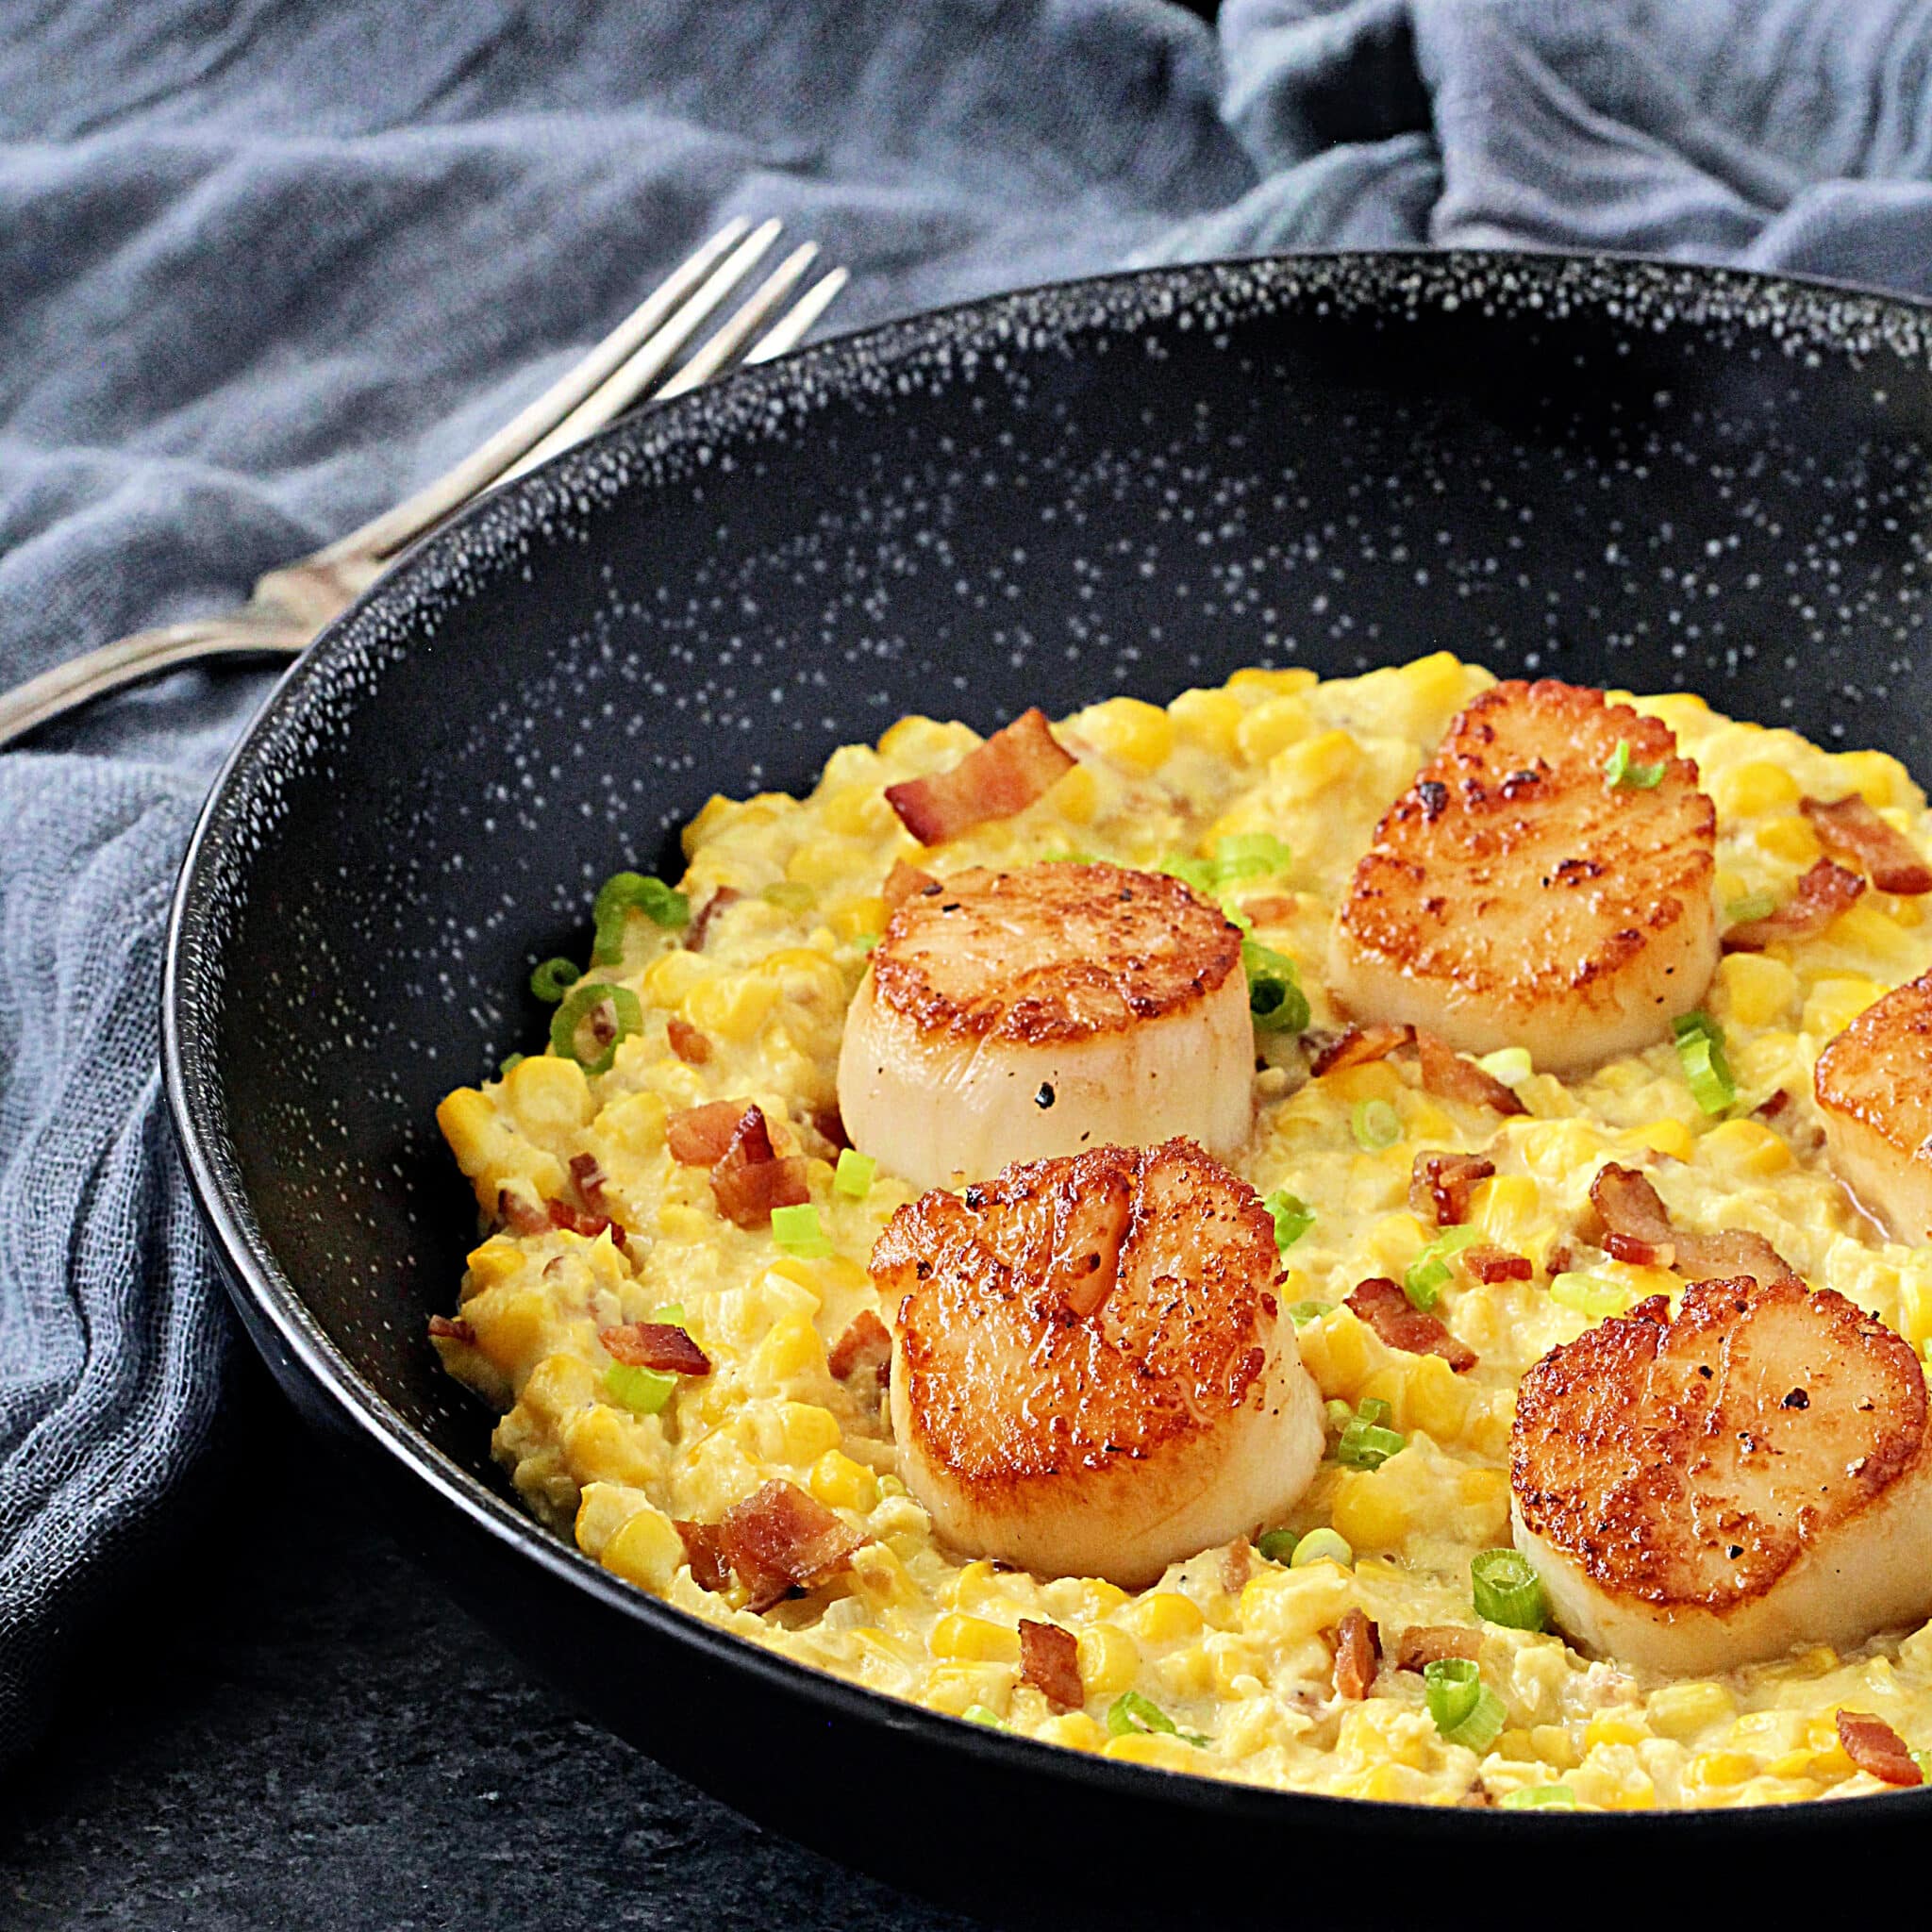 Seared Scallops with Creamy Corn and Bacon